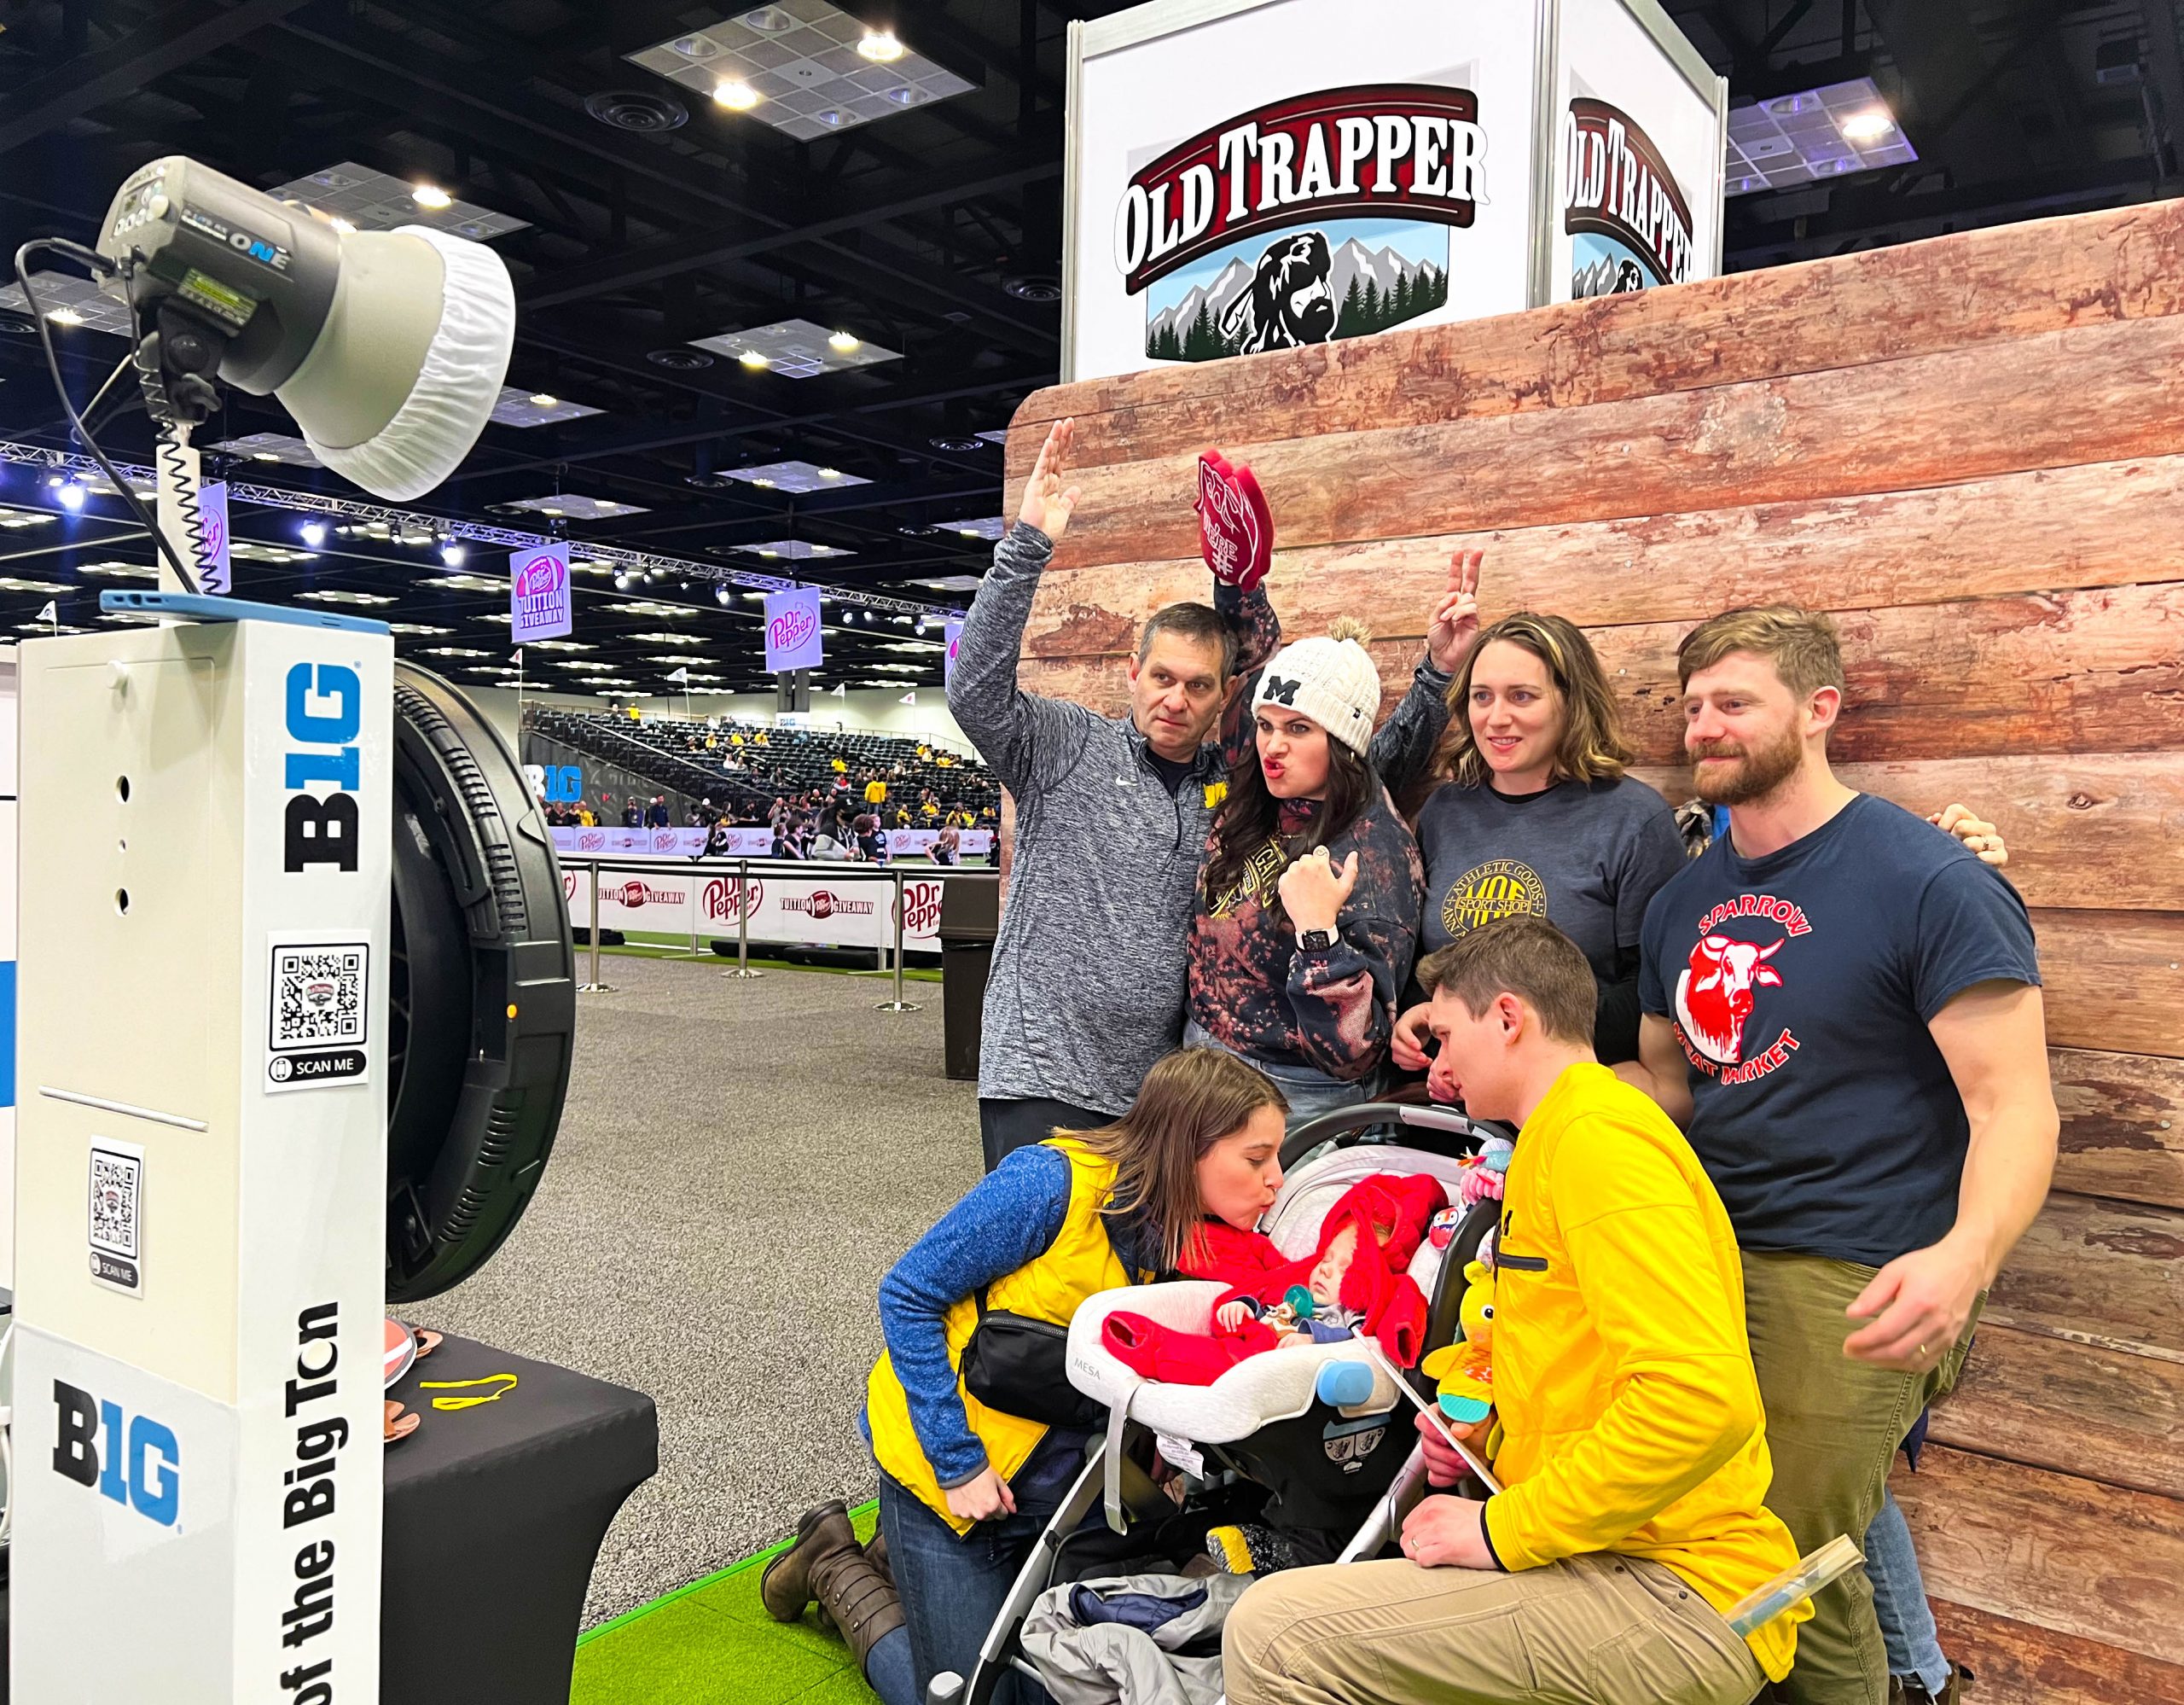 Old Trapper at The Big 10 Fan Fest